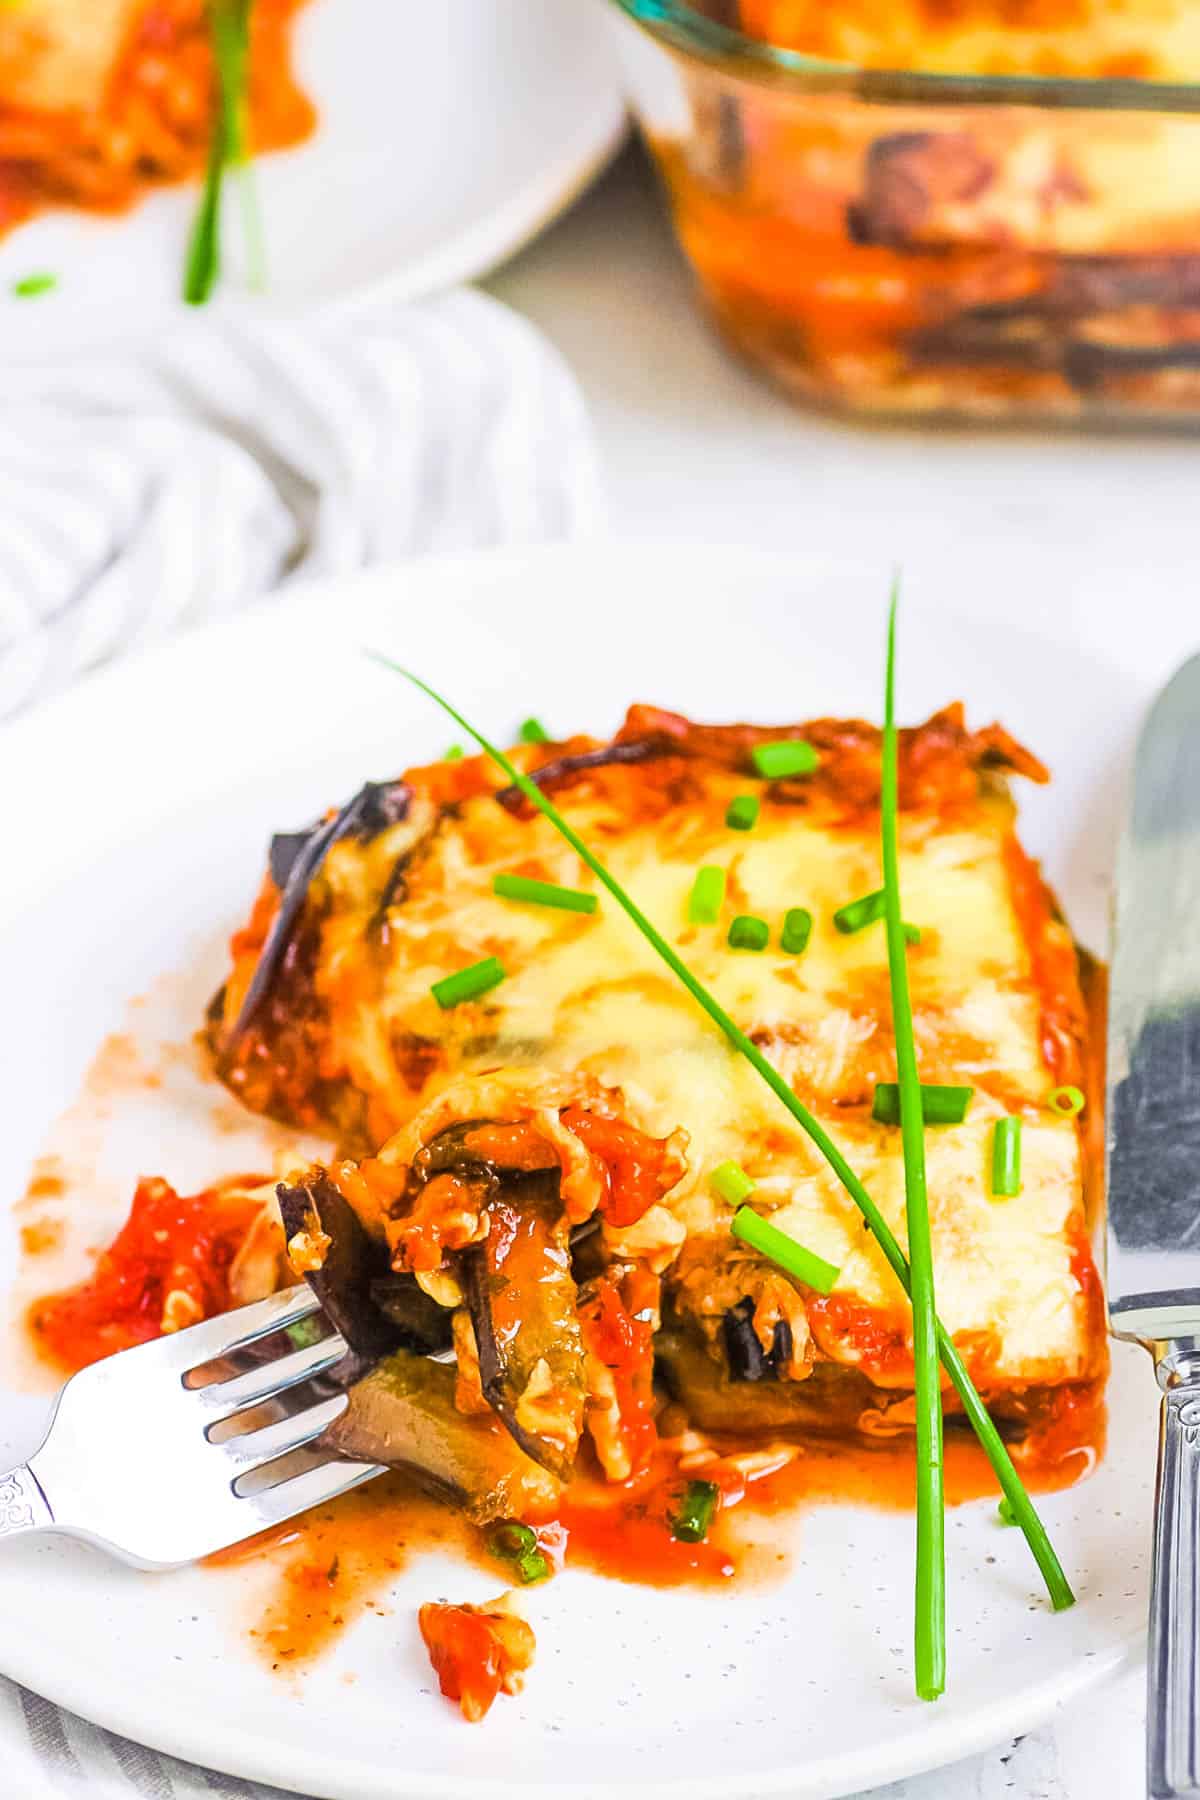 Slice of vegan eggplant parmesan served on a white plate with a fork.